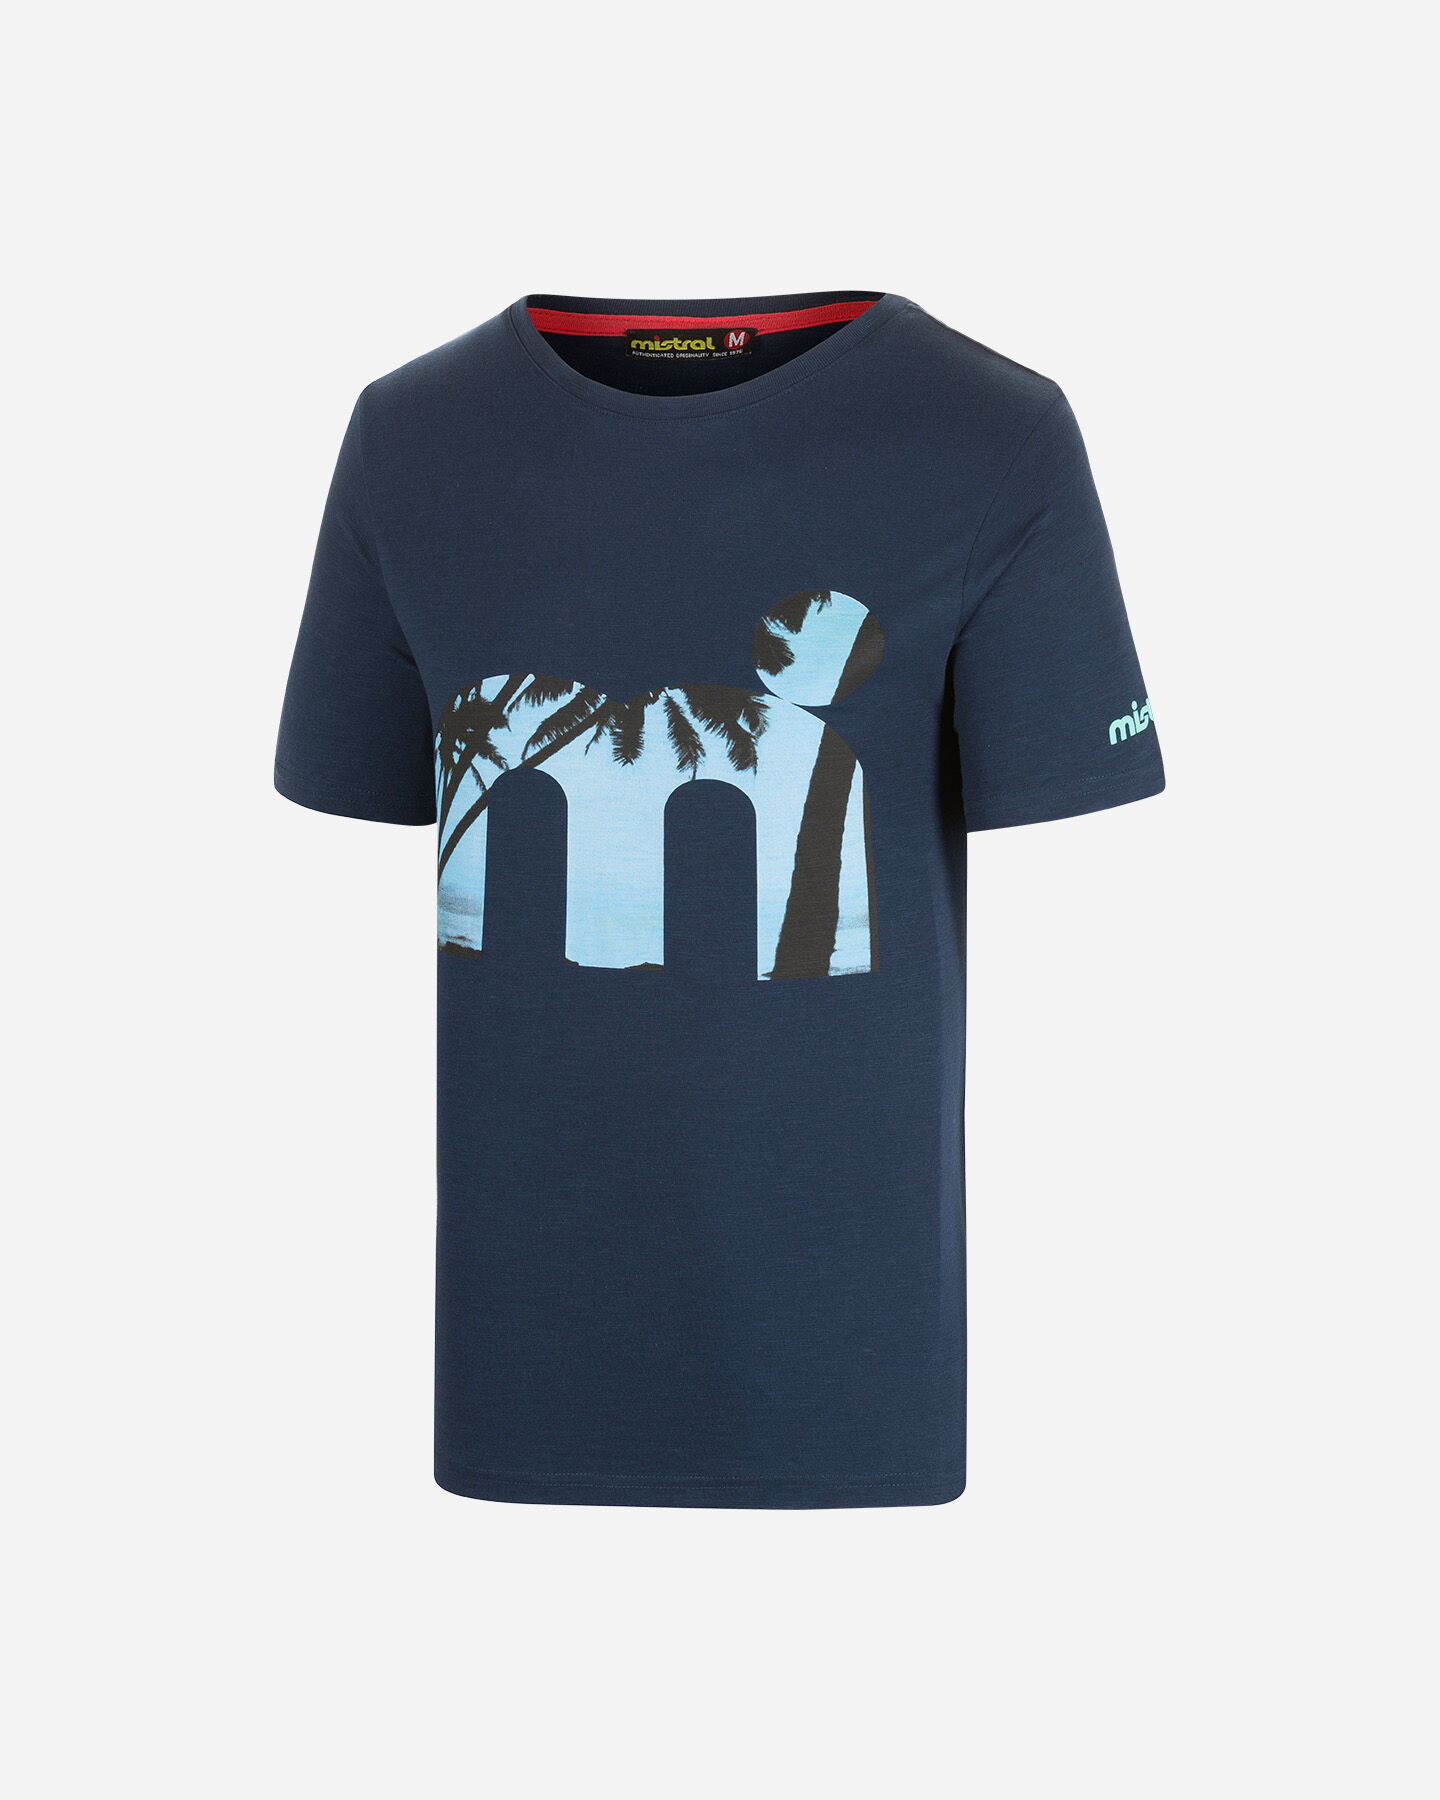  T-Shirt MISTRAL "M" PALM M S4089661|519|S scatto 0